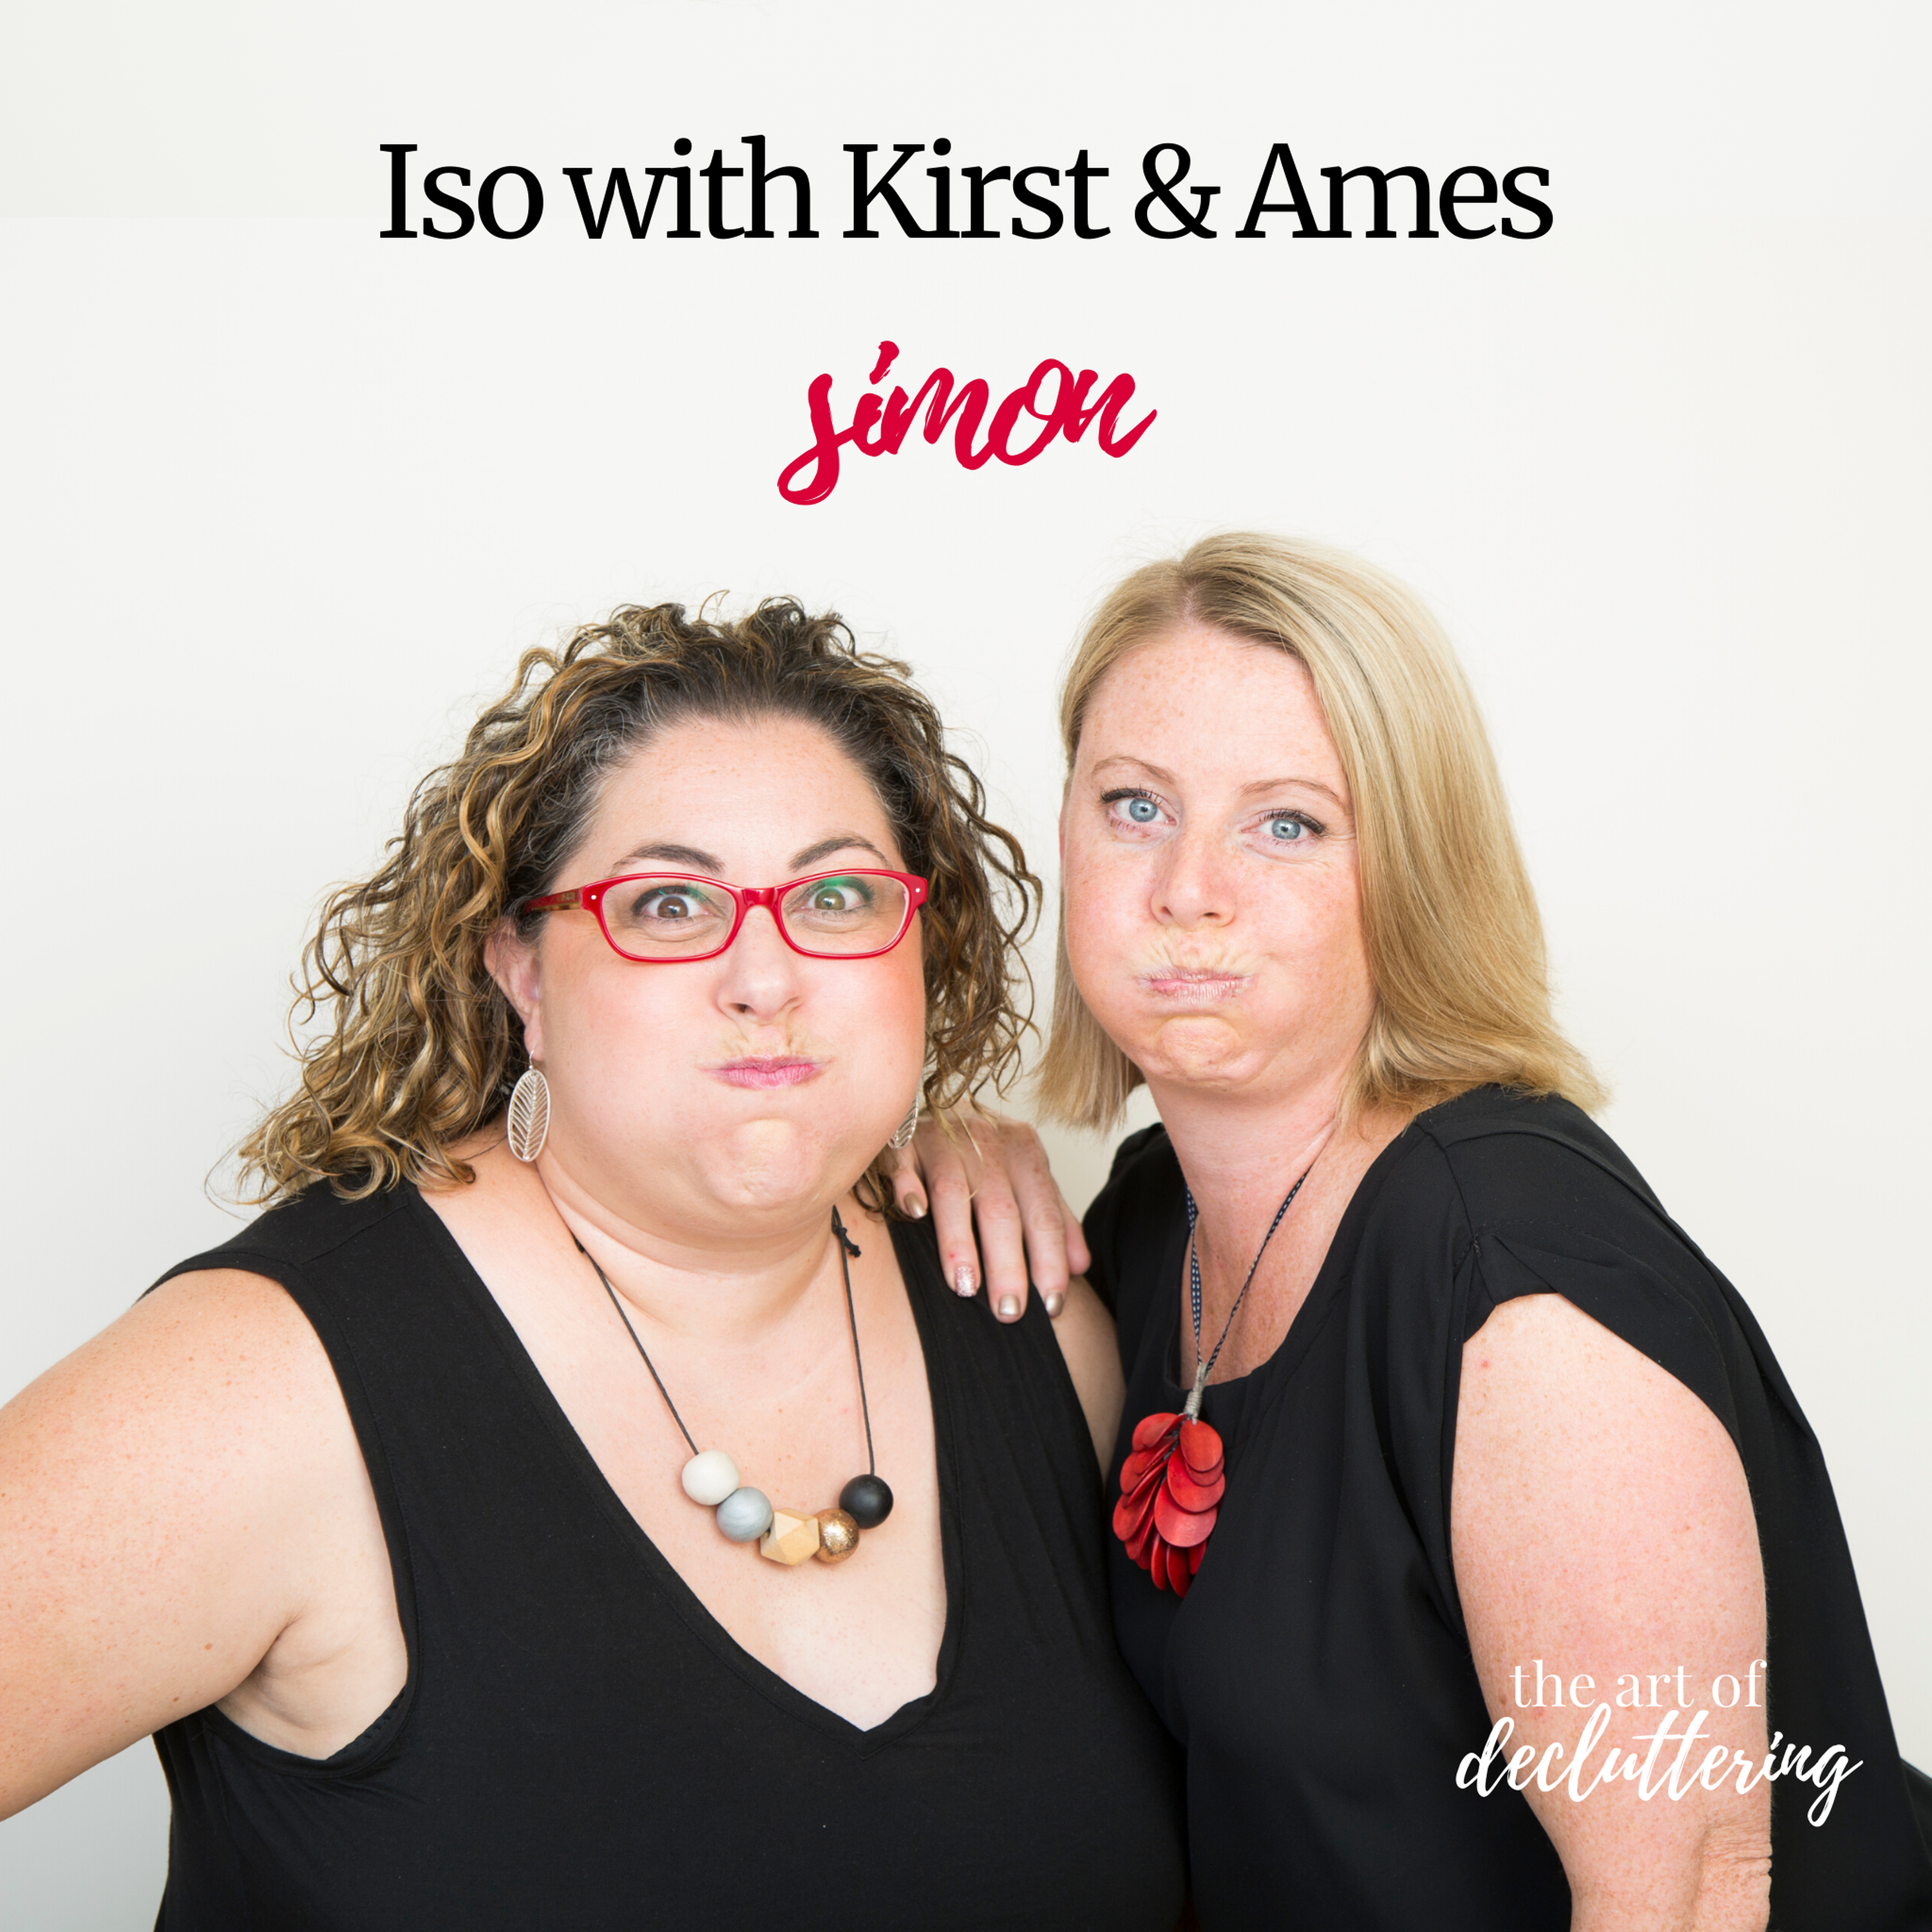 Iso with Kirst & Ames - Simon